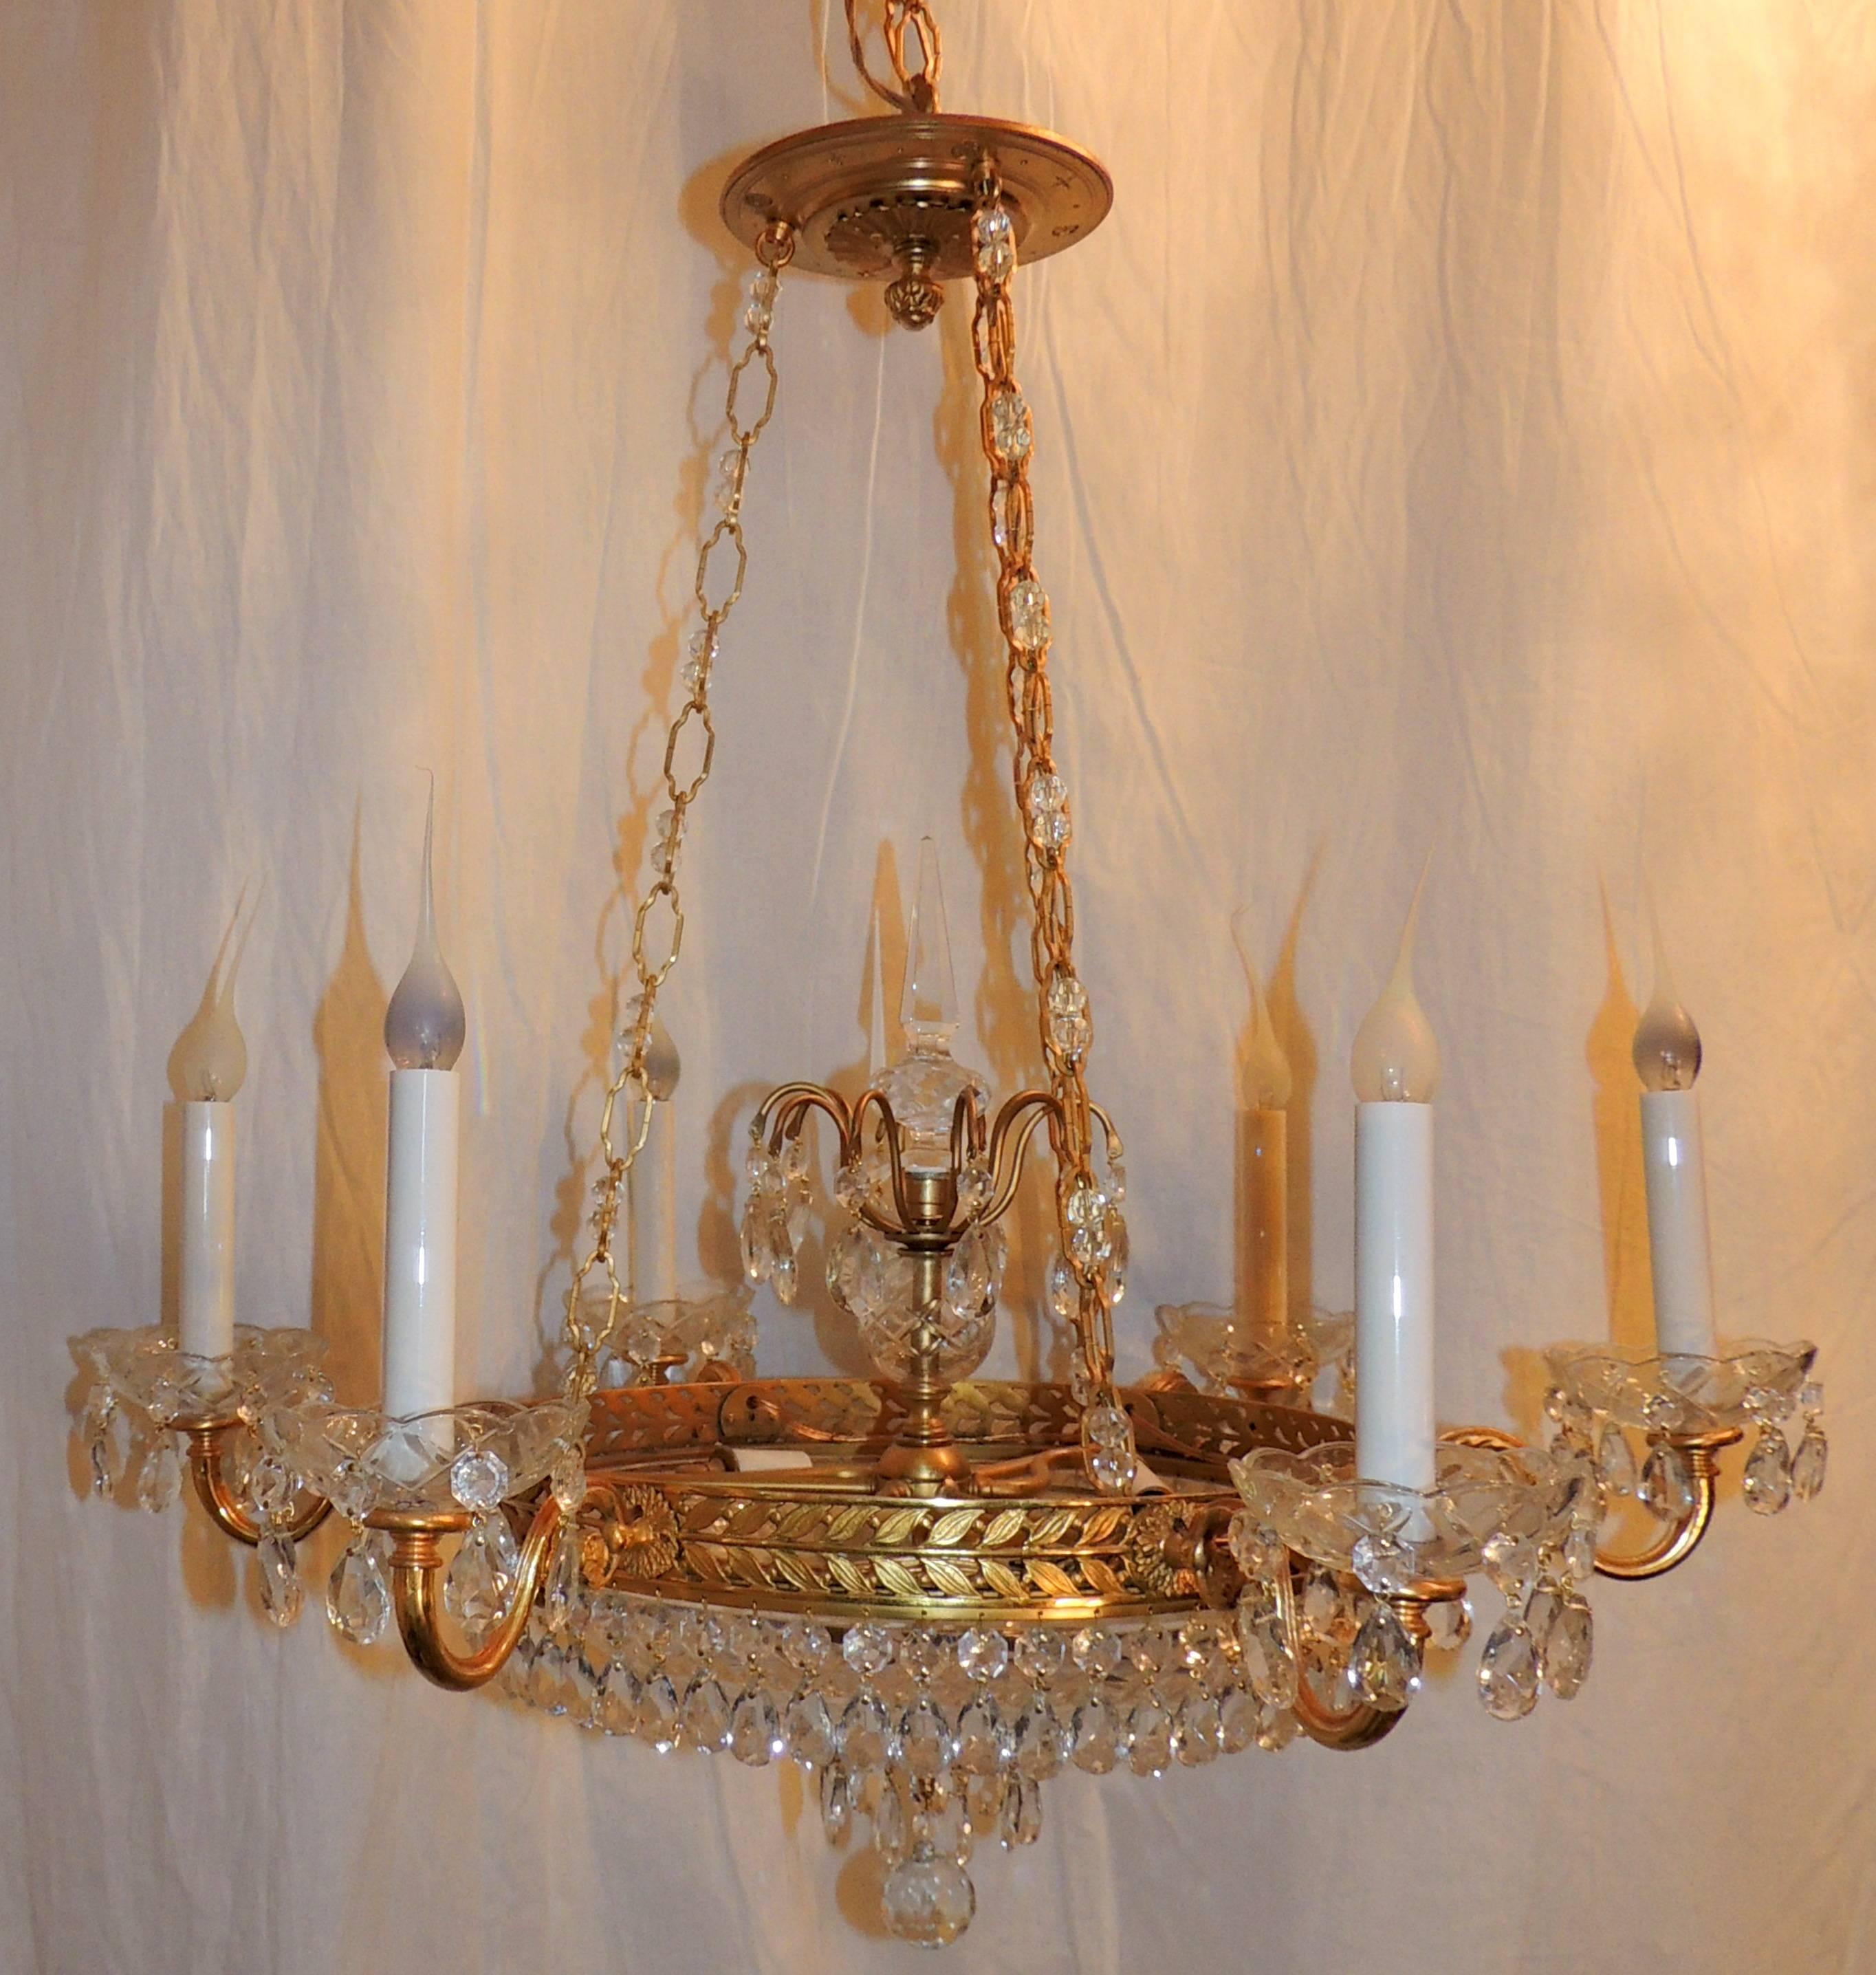 A wonderful French dore bronze neoclassical style Baltic cut crystal bowl Empire chandelier with six-light and three internal lights.